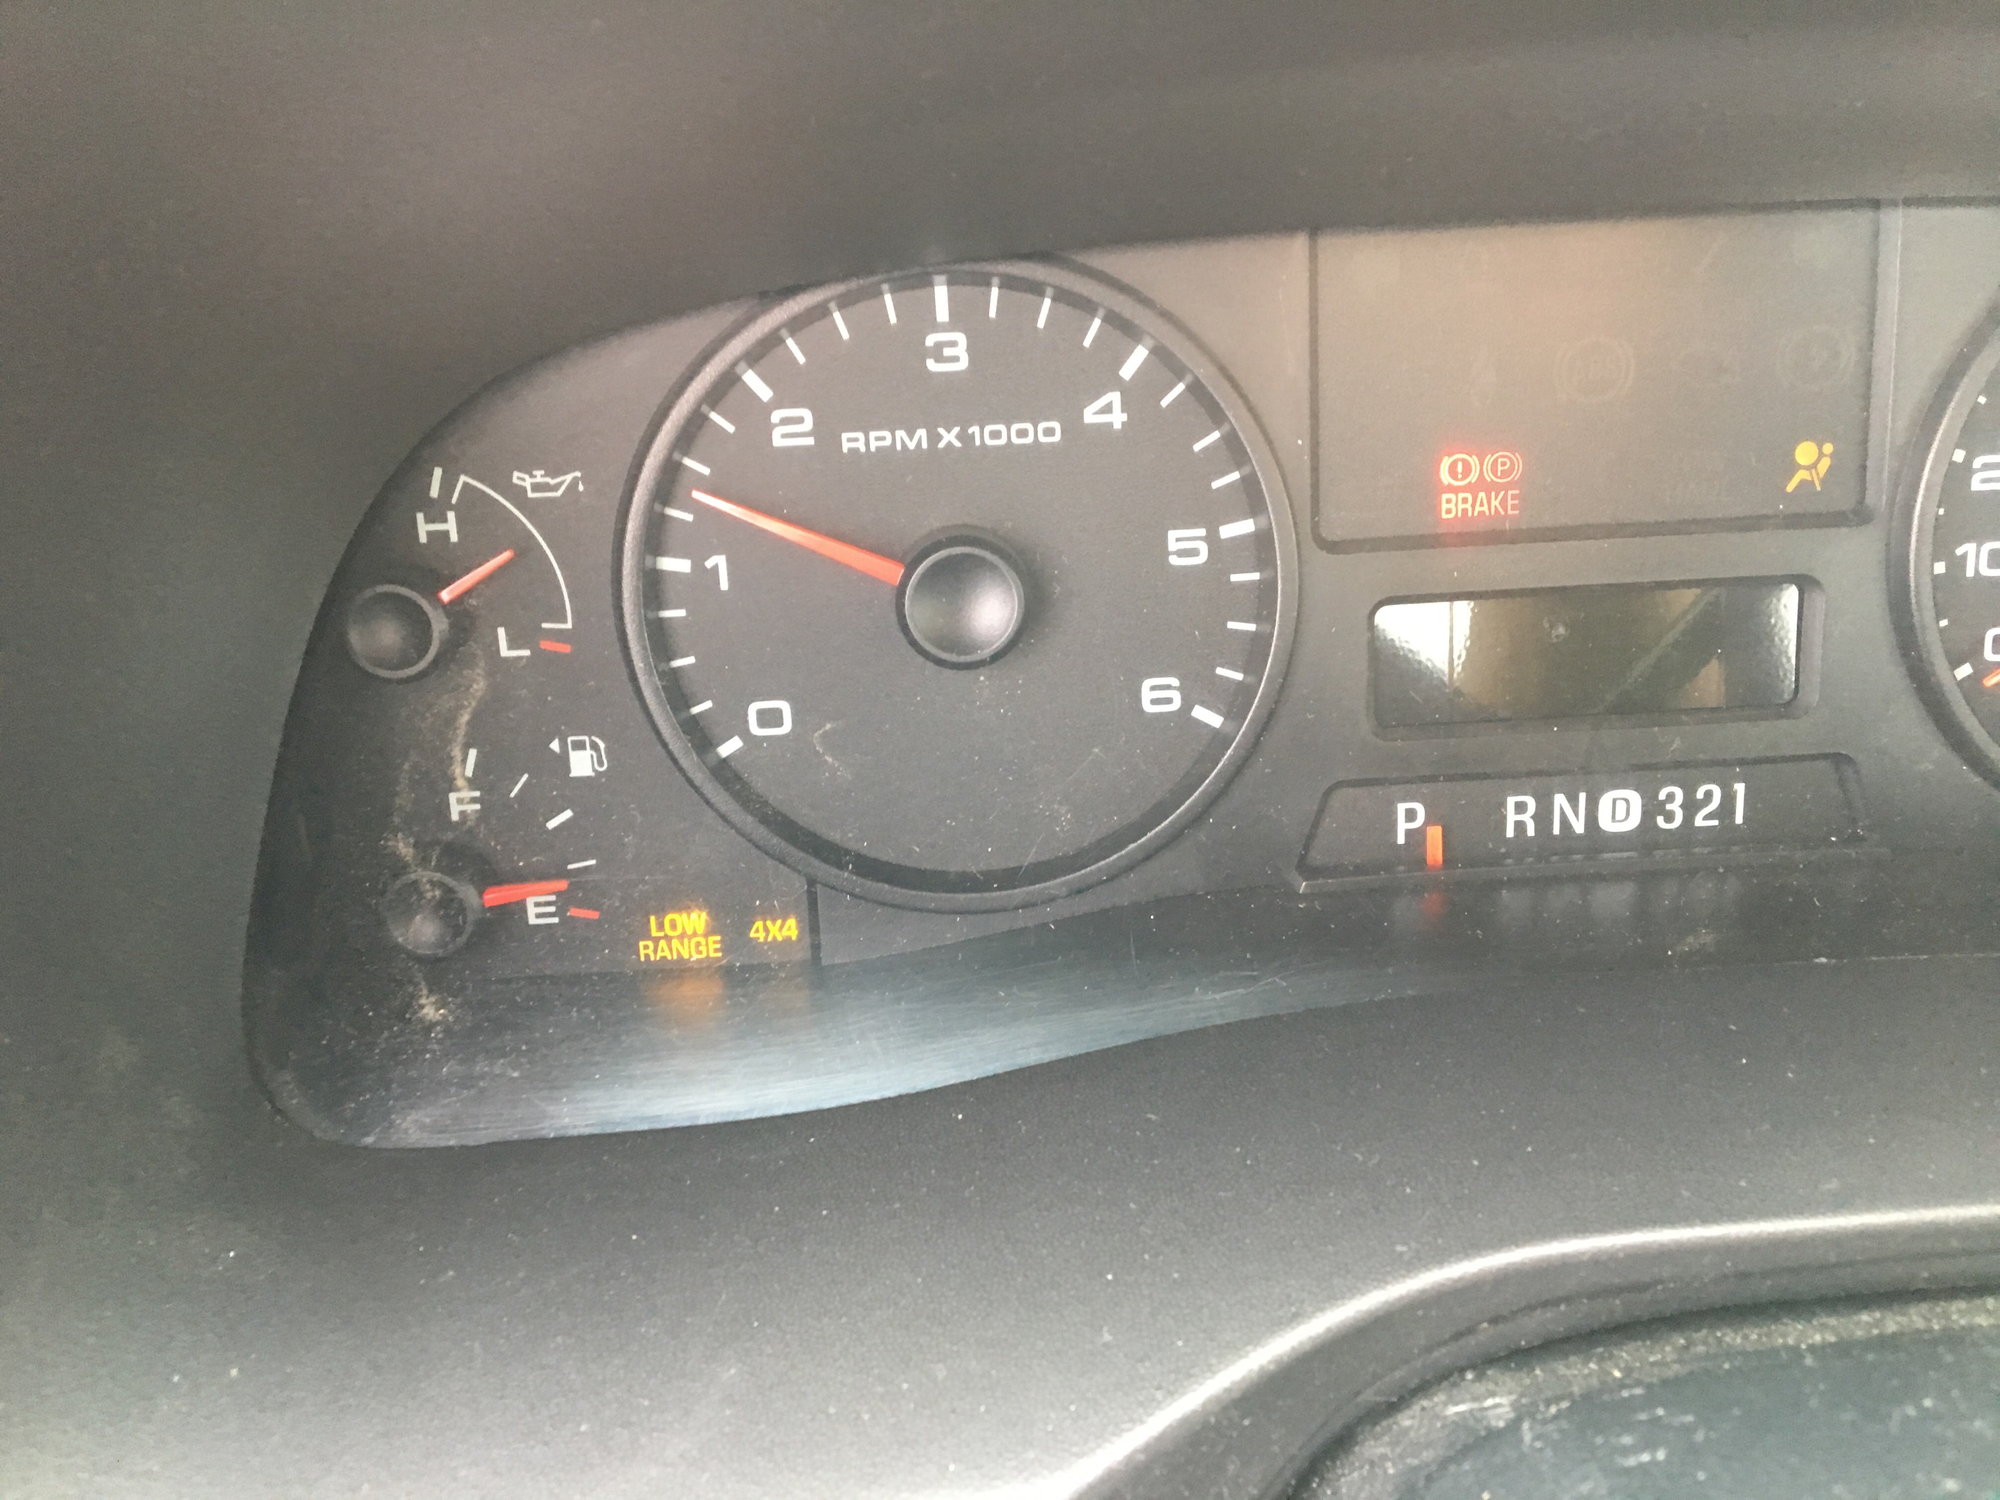 2006 Ford F-250 5.4L Dash Light half functioning - Ford Truck 2006 F250 Dash Lights Not Working